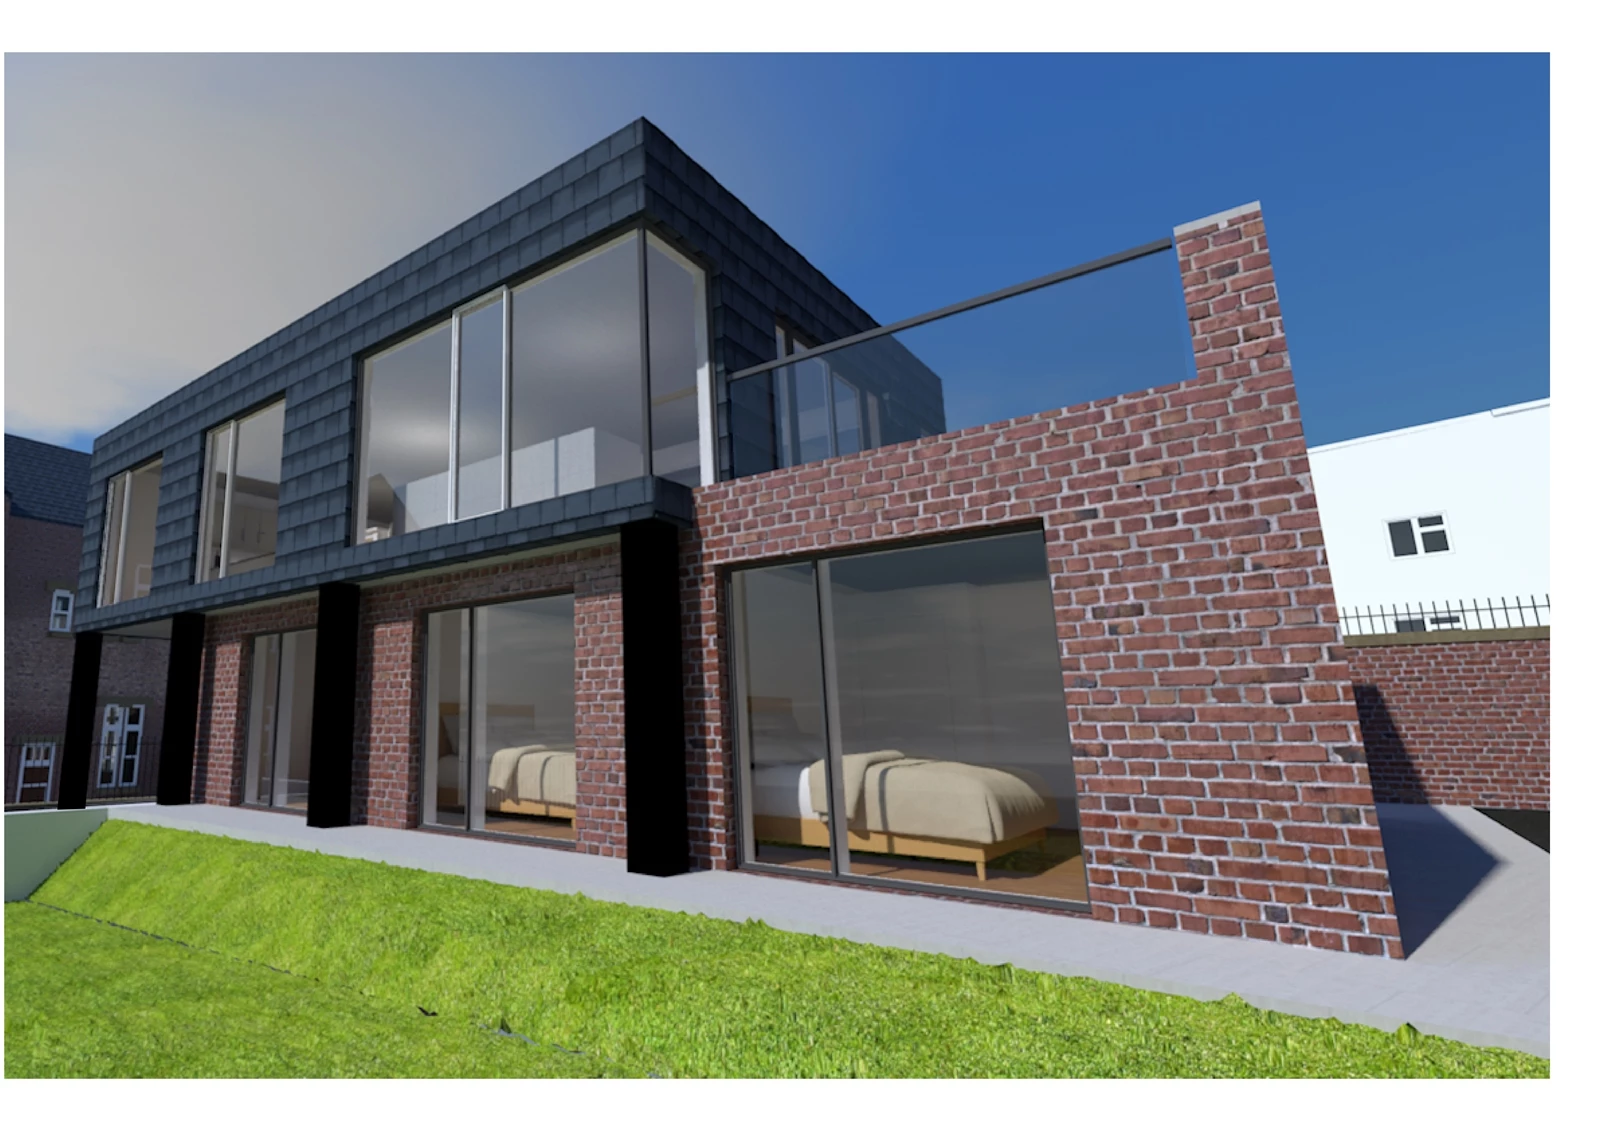 A superb self-build opportunity is released for sale just two miles from Leeds city centre